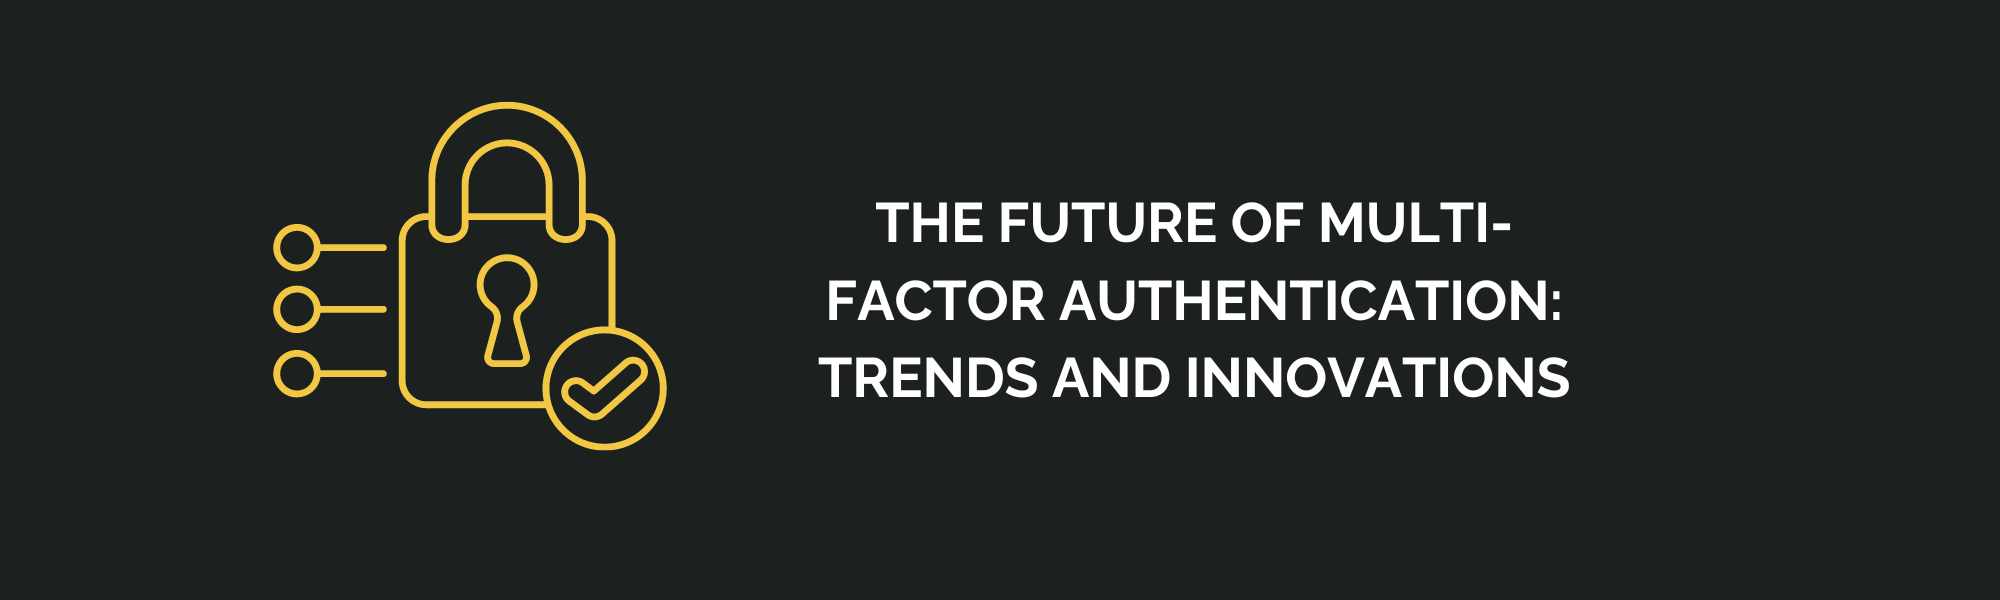 The Future of Multi-Factor Authentication: Trends and Innovations